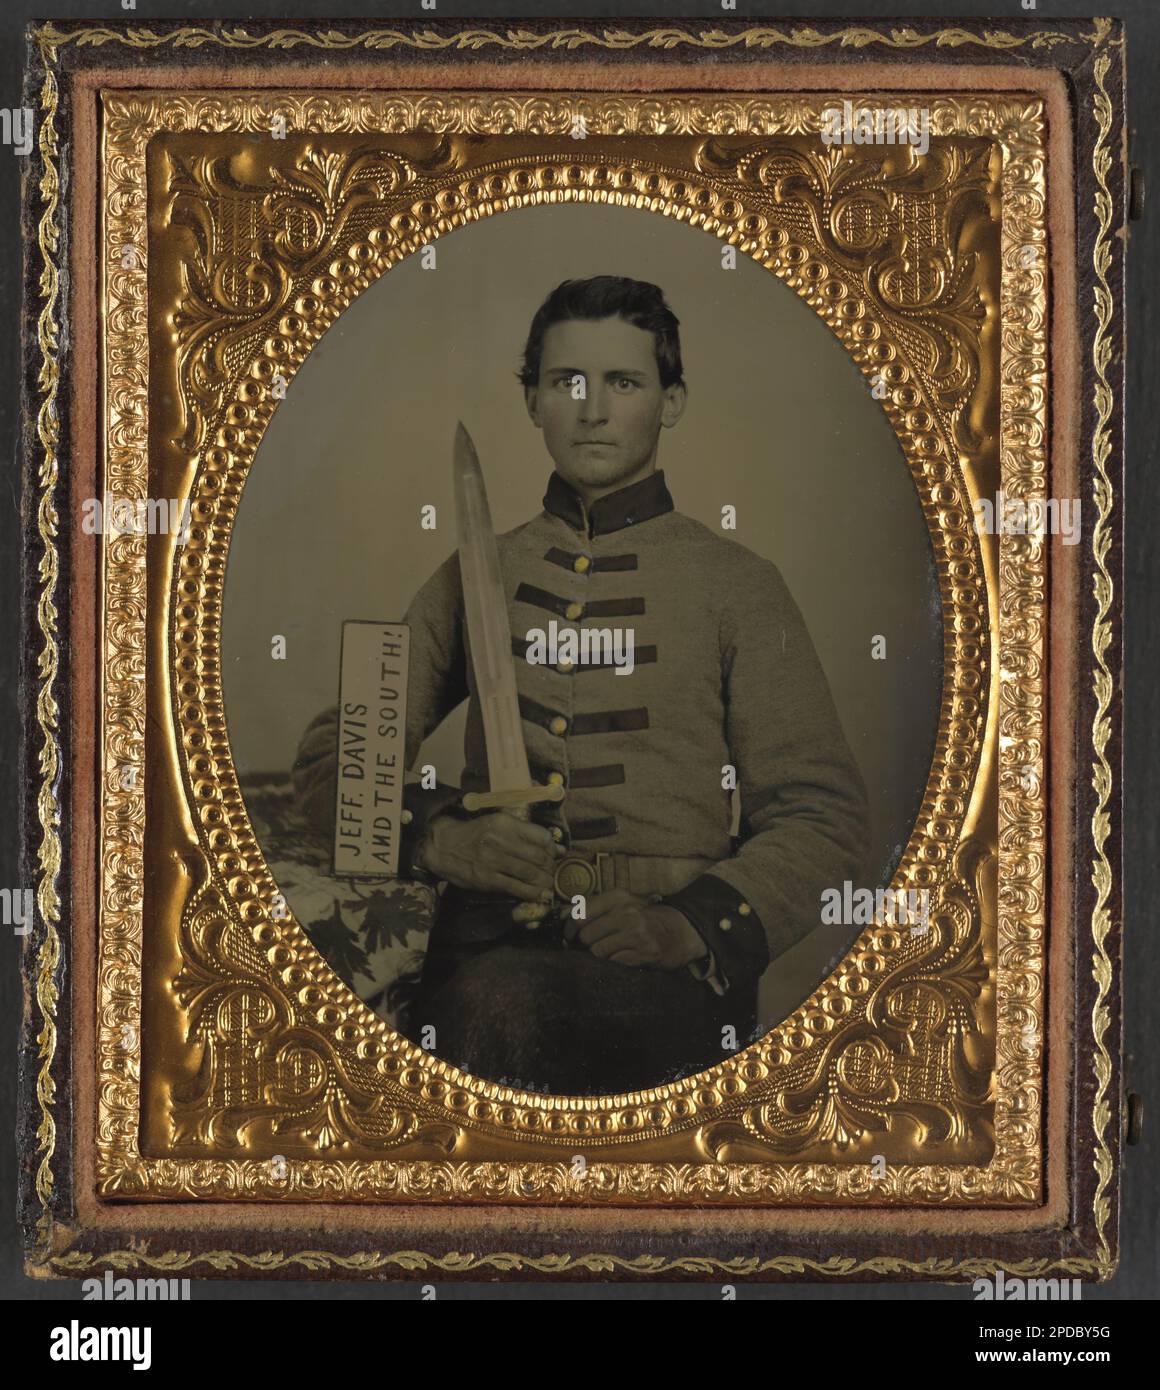 Private Henry Augustus Moore of Co. F, 15th Mississippi Infantry Regiment, with artillery short sword and sign reading Jeff Davis and the South!. Liljenquist Family Collection of Civil War Photographs , FAmbrotype/Tintype photograph filing series , Published in: Wynne, Ben. A hard trip: A history of the 15th Mississippi Infantry, CSA. Macon, Georgia: Mercer University Press, 2003, p. xvi, pp/liljconfed. Moore, Henry Augustus, 1827-1862, Confederate States of America, Army, Mississippi Infantry Regiment, 15th, People, 1860-1870, Soldiers, Confederate, 1860-1870, Military uniforms, Confederate, Stock Photo